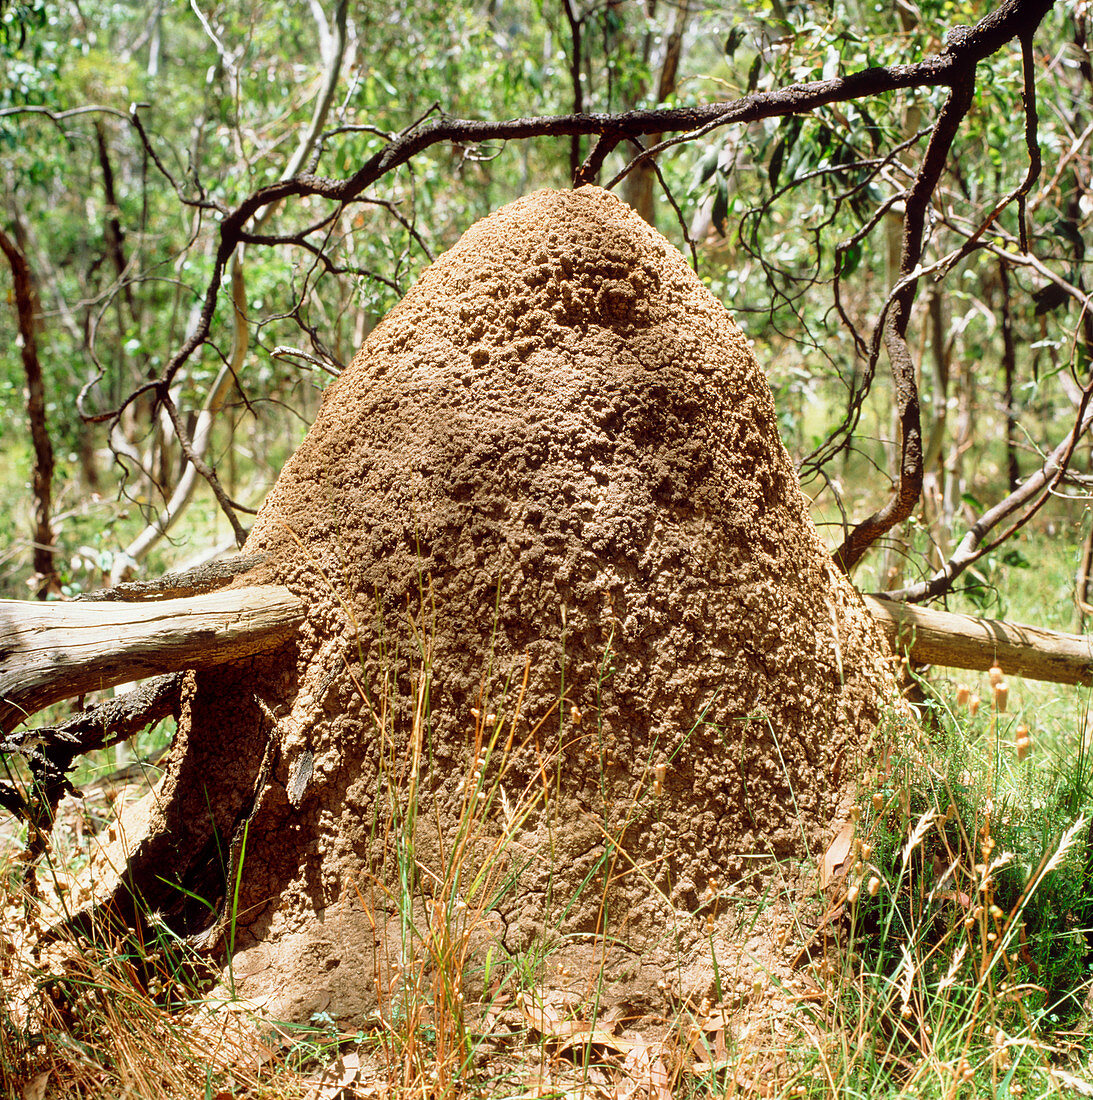 View of a termite mound